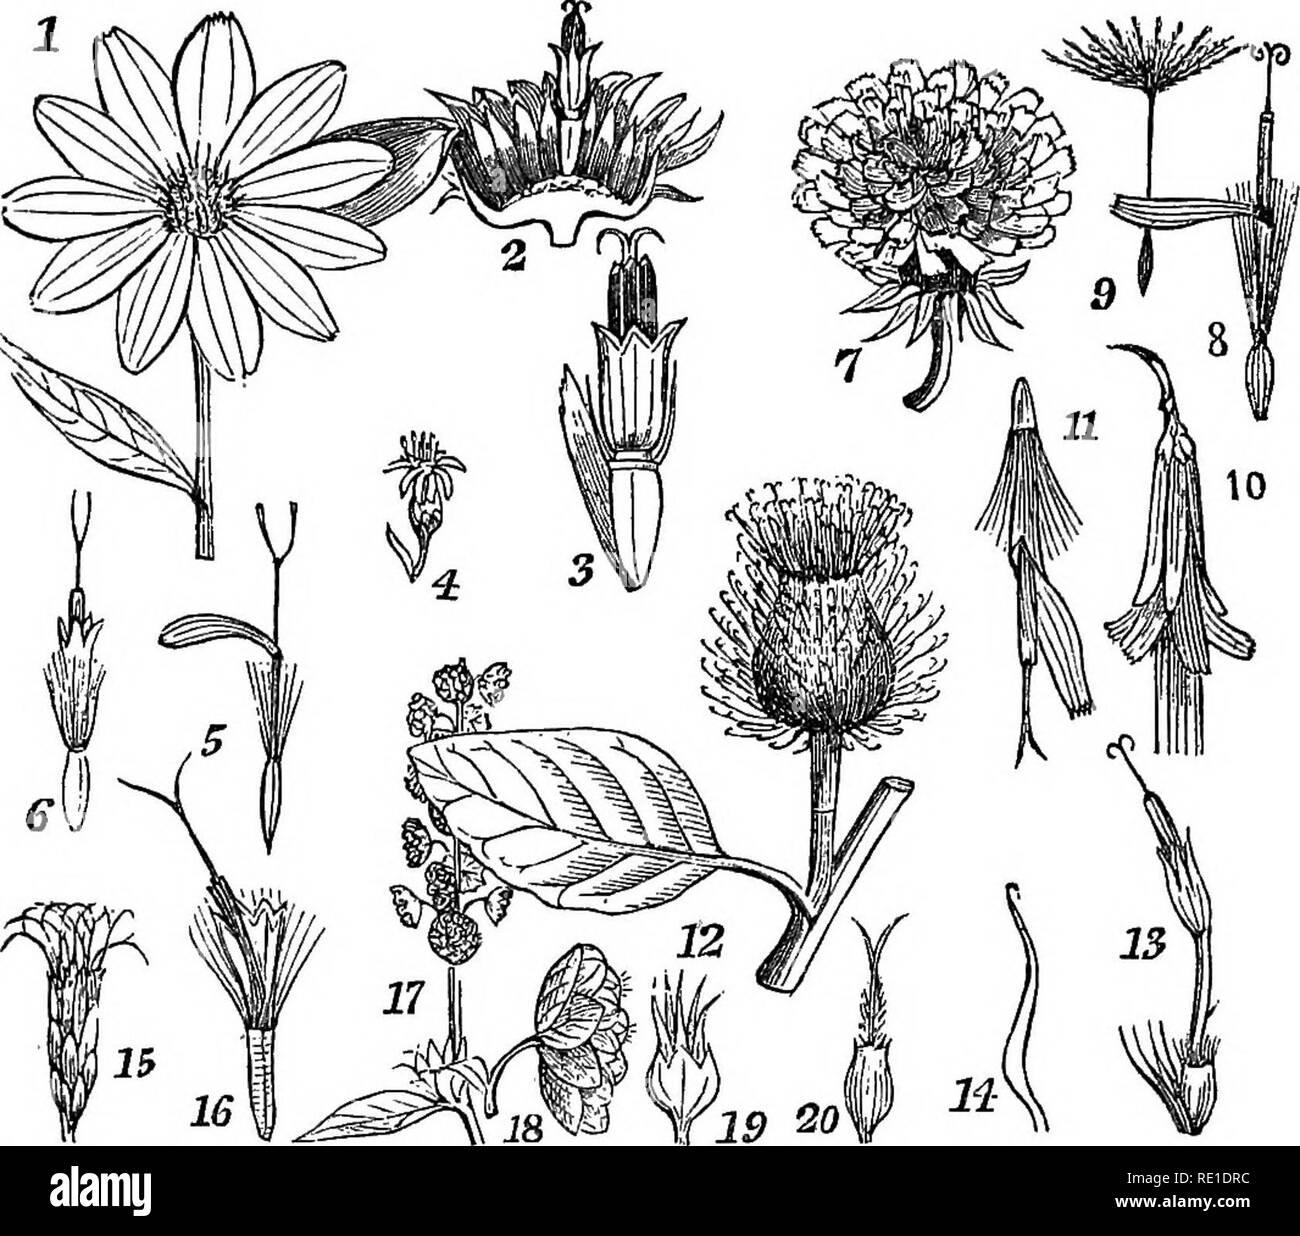 . Class-book of botany : being outlines of the structure, physiology and classification of plants : with a flora of the United States and Canada . Botany; Botany; Botany. Obdhb 'ZO.—composite. 407. tonic and febriftigal, as in the chamomile, colt's-foot, thoroughwort golden rod, etc. Some are anthelmintics from the prevalence of the reainous principle, as tansey, Artemisia, Vernonia. Others arc aromatic and extremely bitter, as wormwood and all the Bpeciea of Artemisia, Other species are very acrid, as nmyweed. The Jerusalem artichoke (Helianthus tuberosus) the vege- table oyster (Tragopogon), Stock Photo